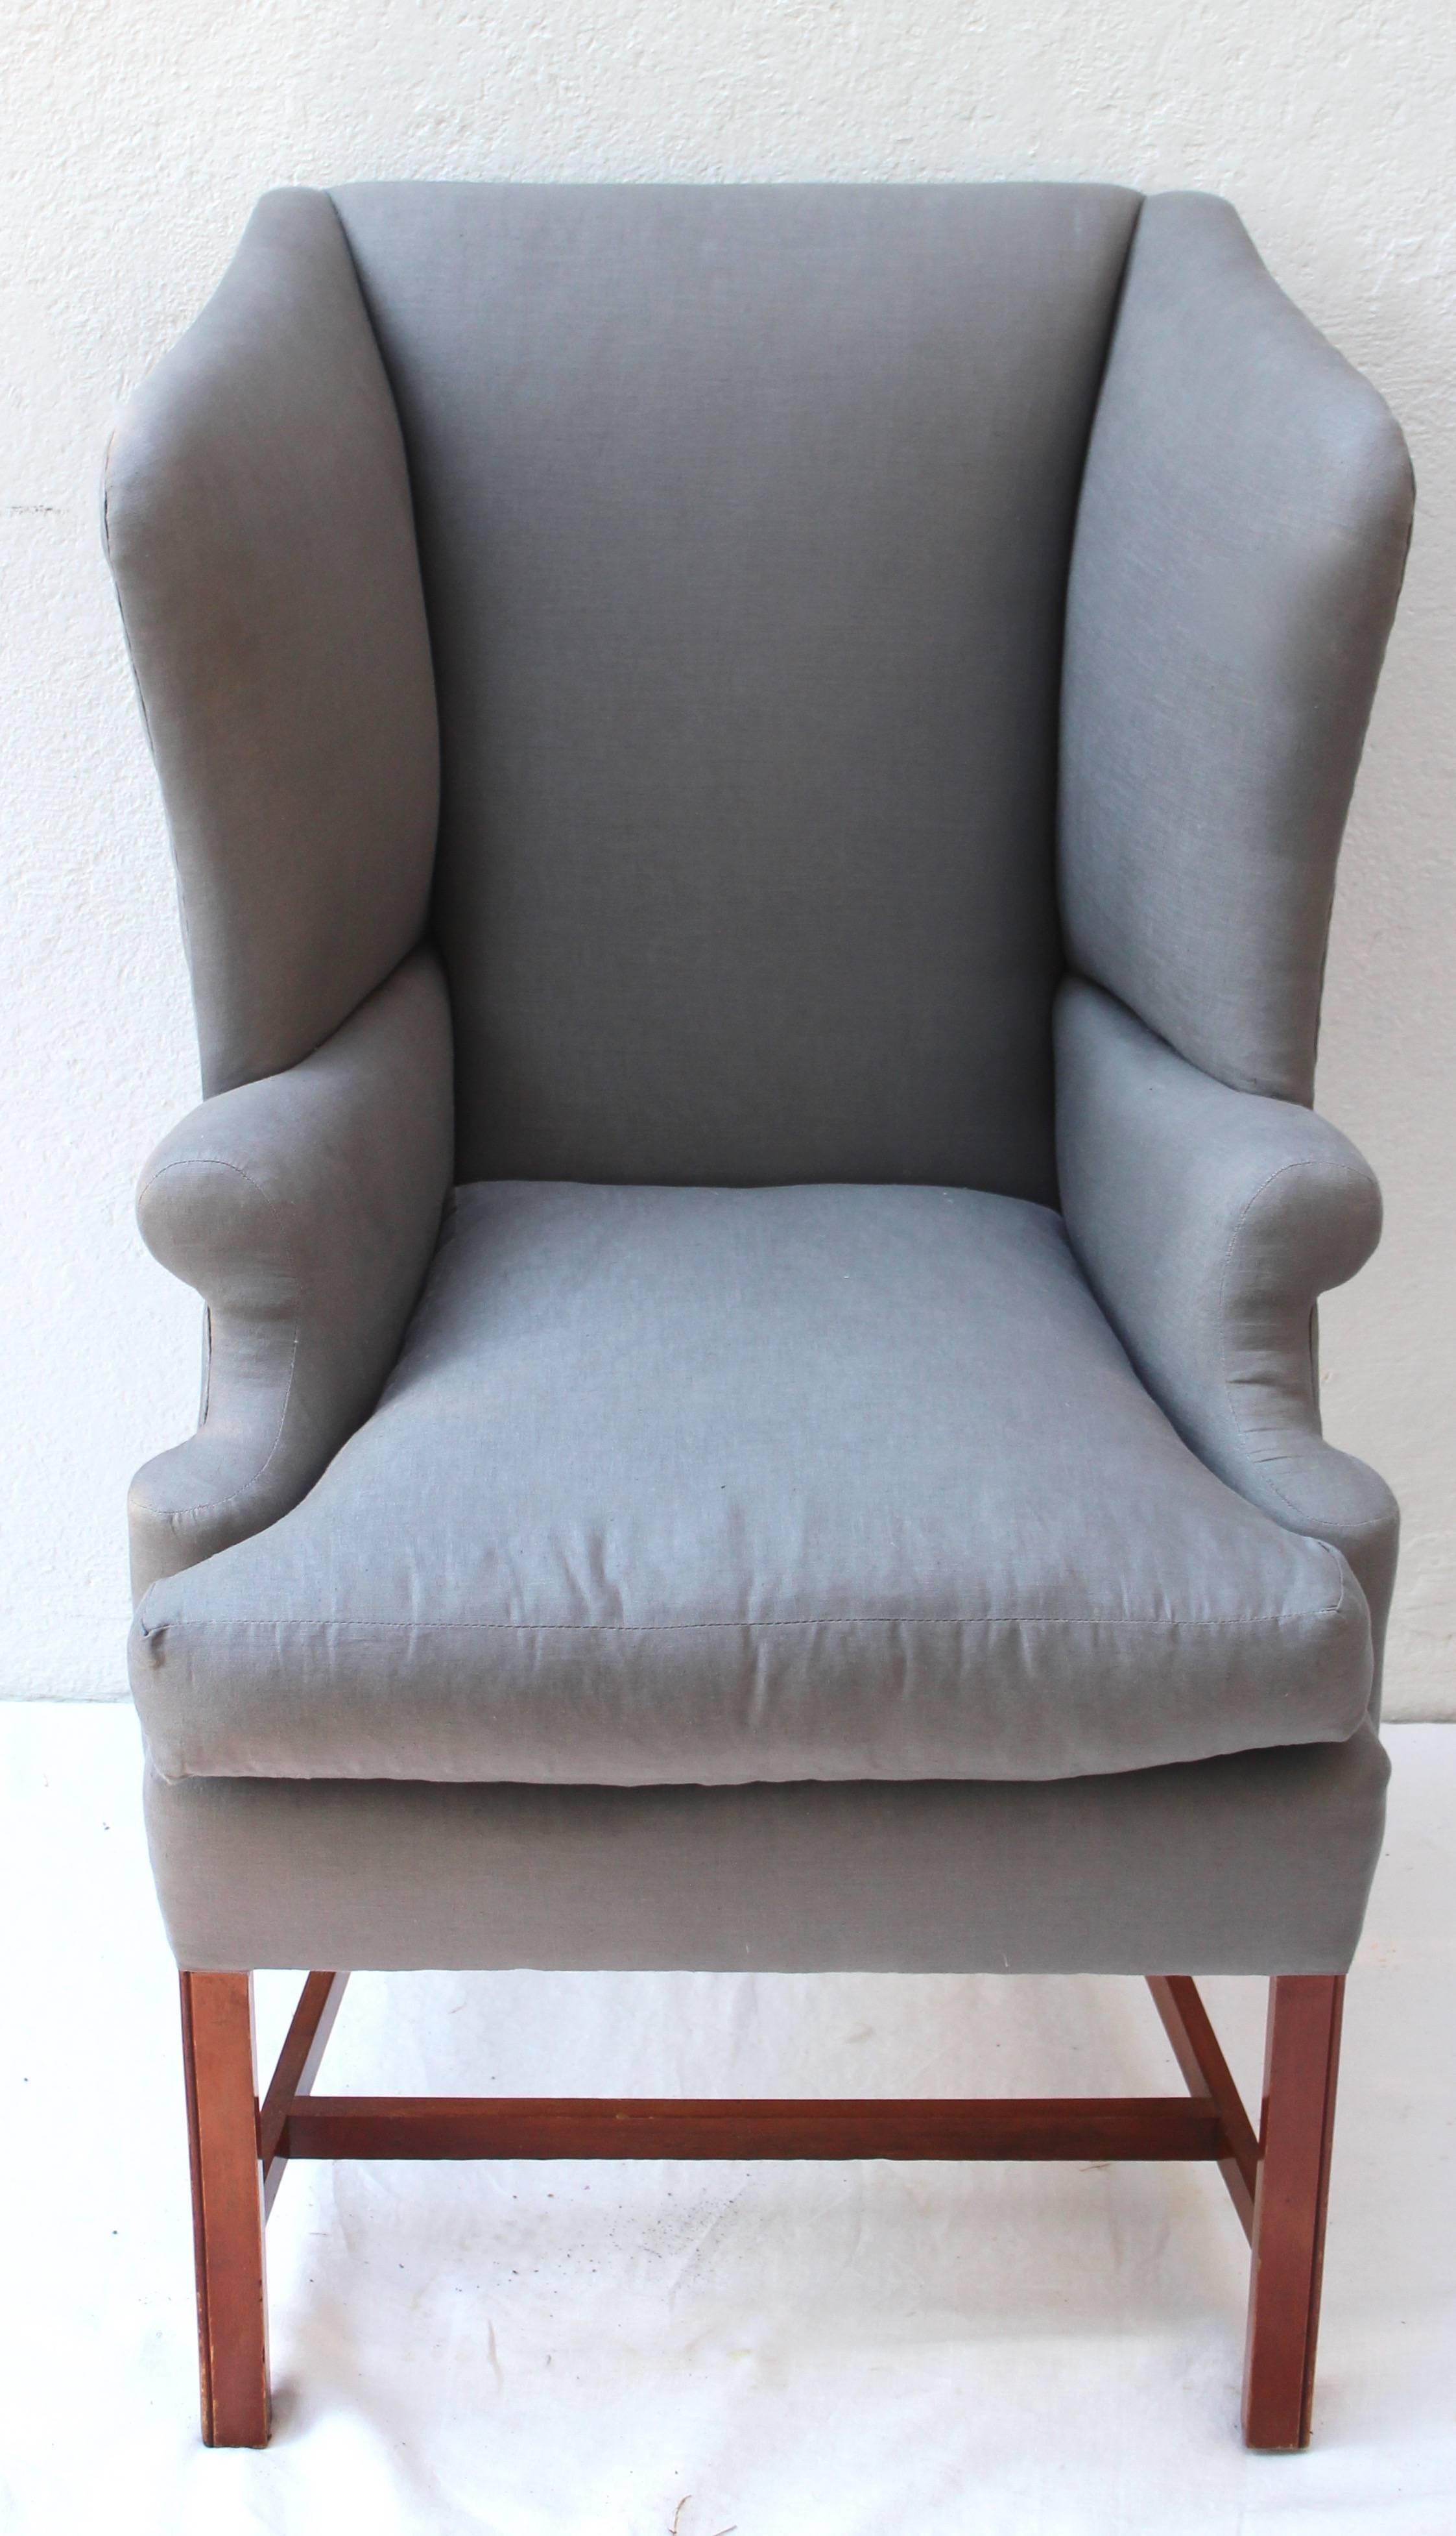 Very special petite Georgian style wingback chair newly upholstered in grey linen.